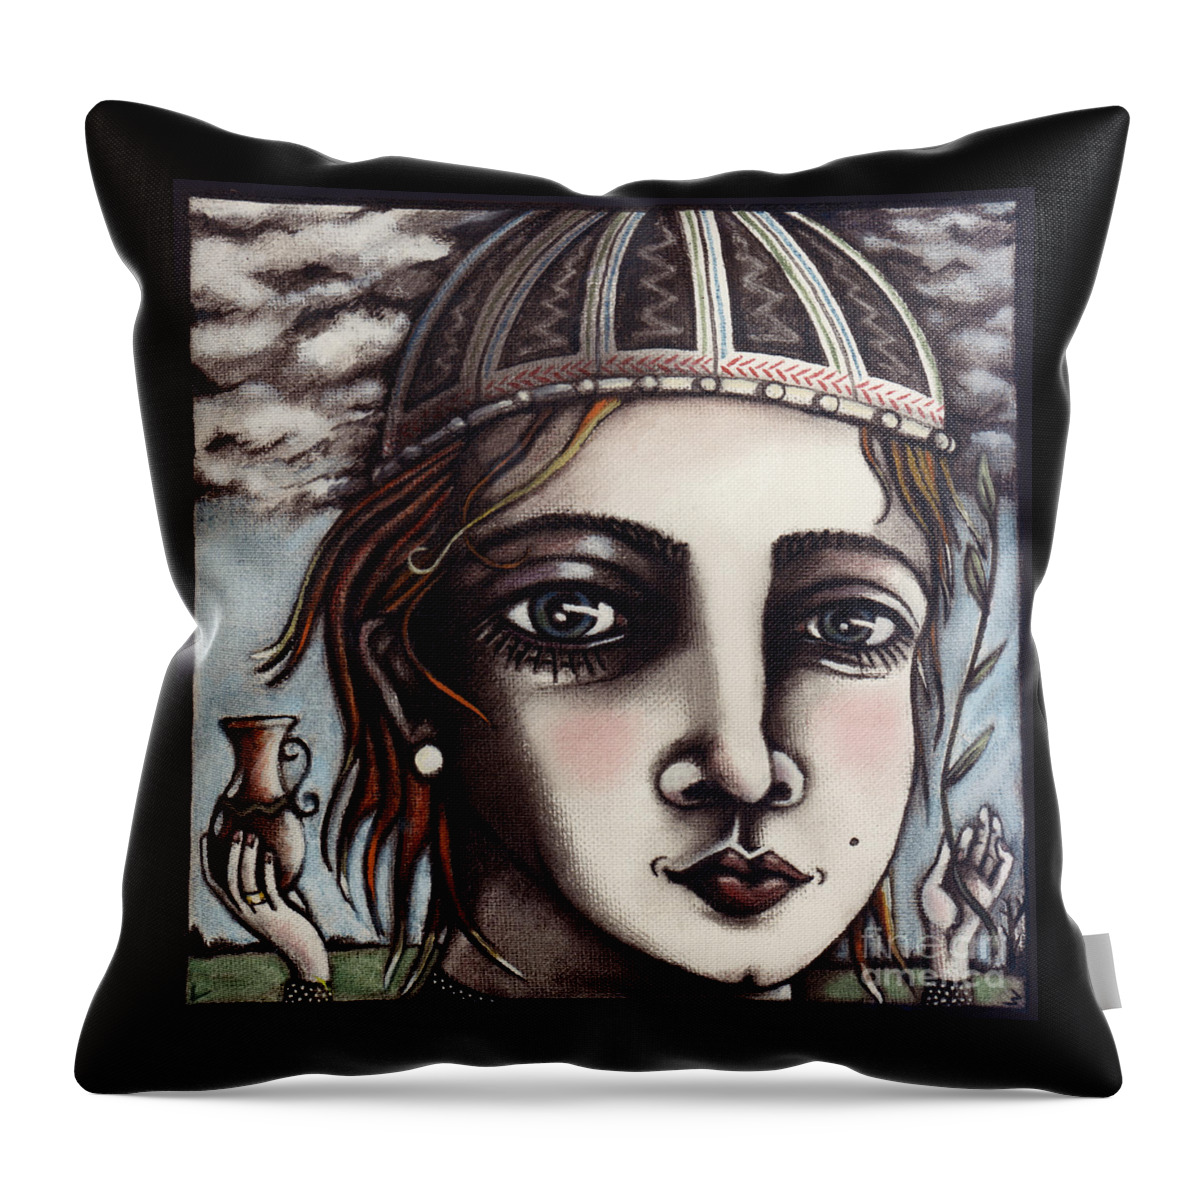 Quirky Throw Pillow featuring the painting Medieval Herbalist by Valerie White